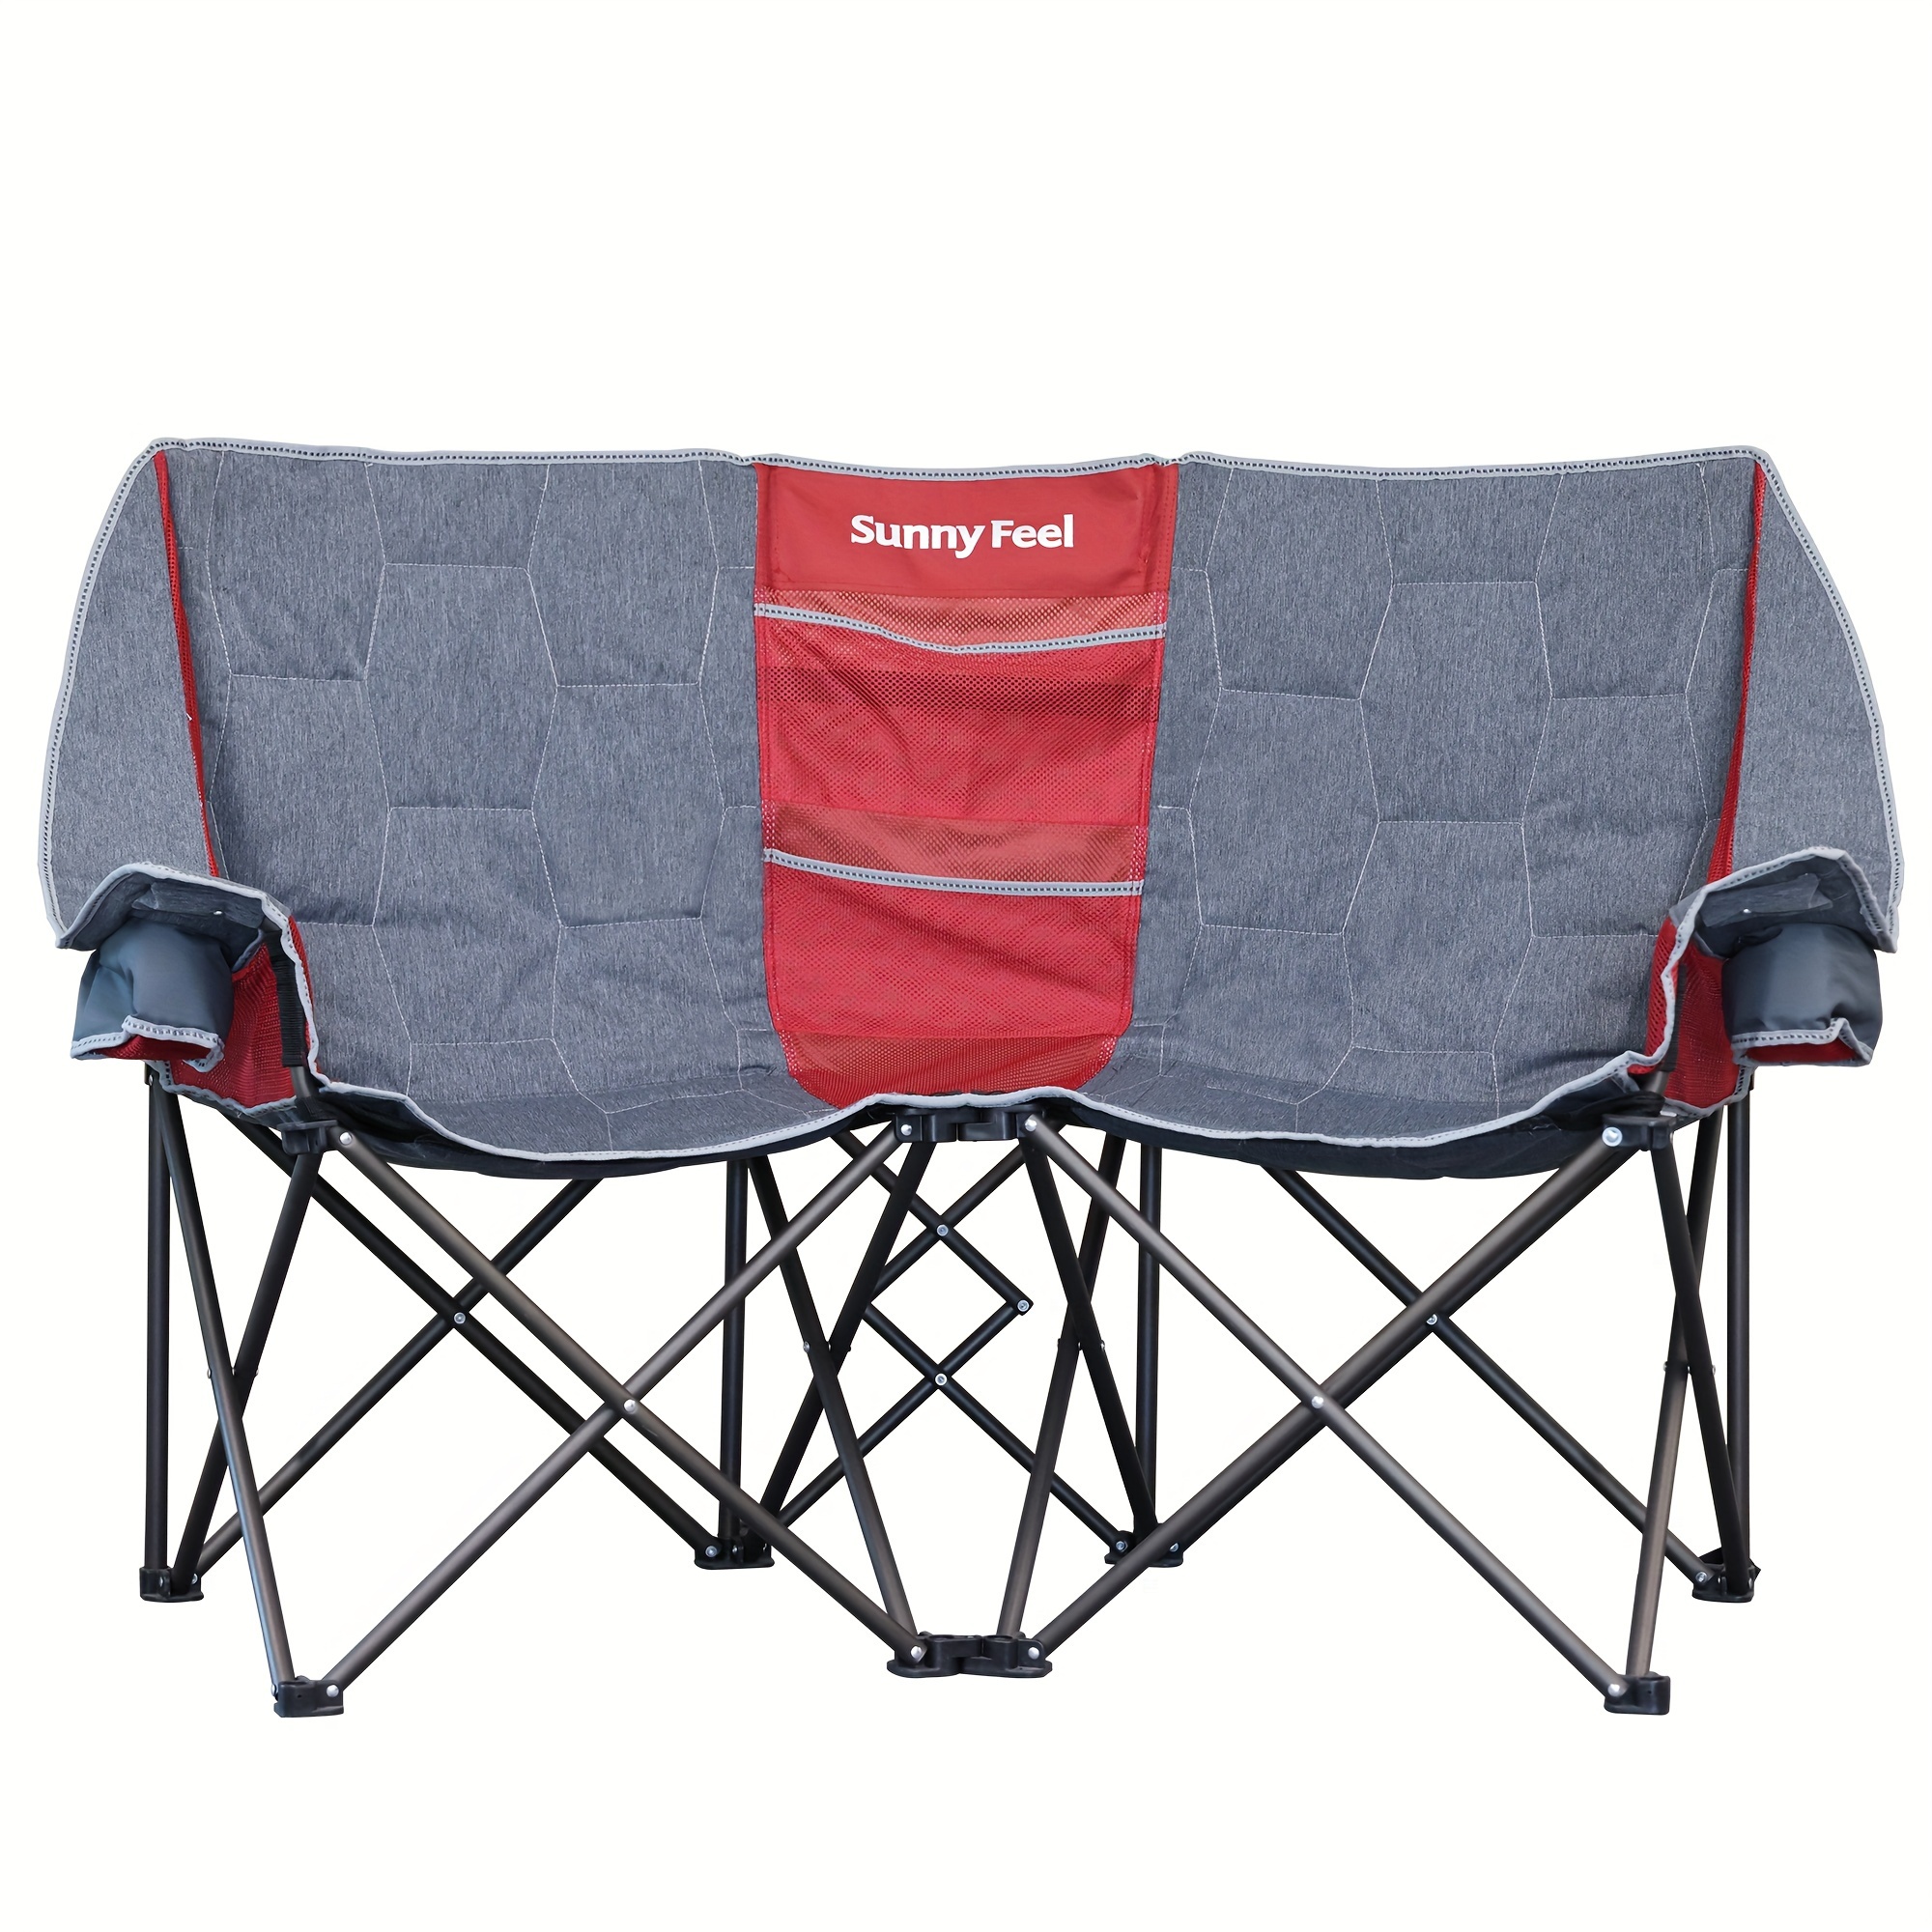 

Sunnyfeel Folding Double Camping Chair, Oversized Loveseat Chair, Heavy Duty Portable/foldable Lawn Chair With Storage For Outside/outdoor/travel/picnic, Fold Up Camp Chairs For Adults 2 People